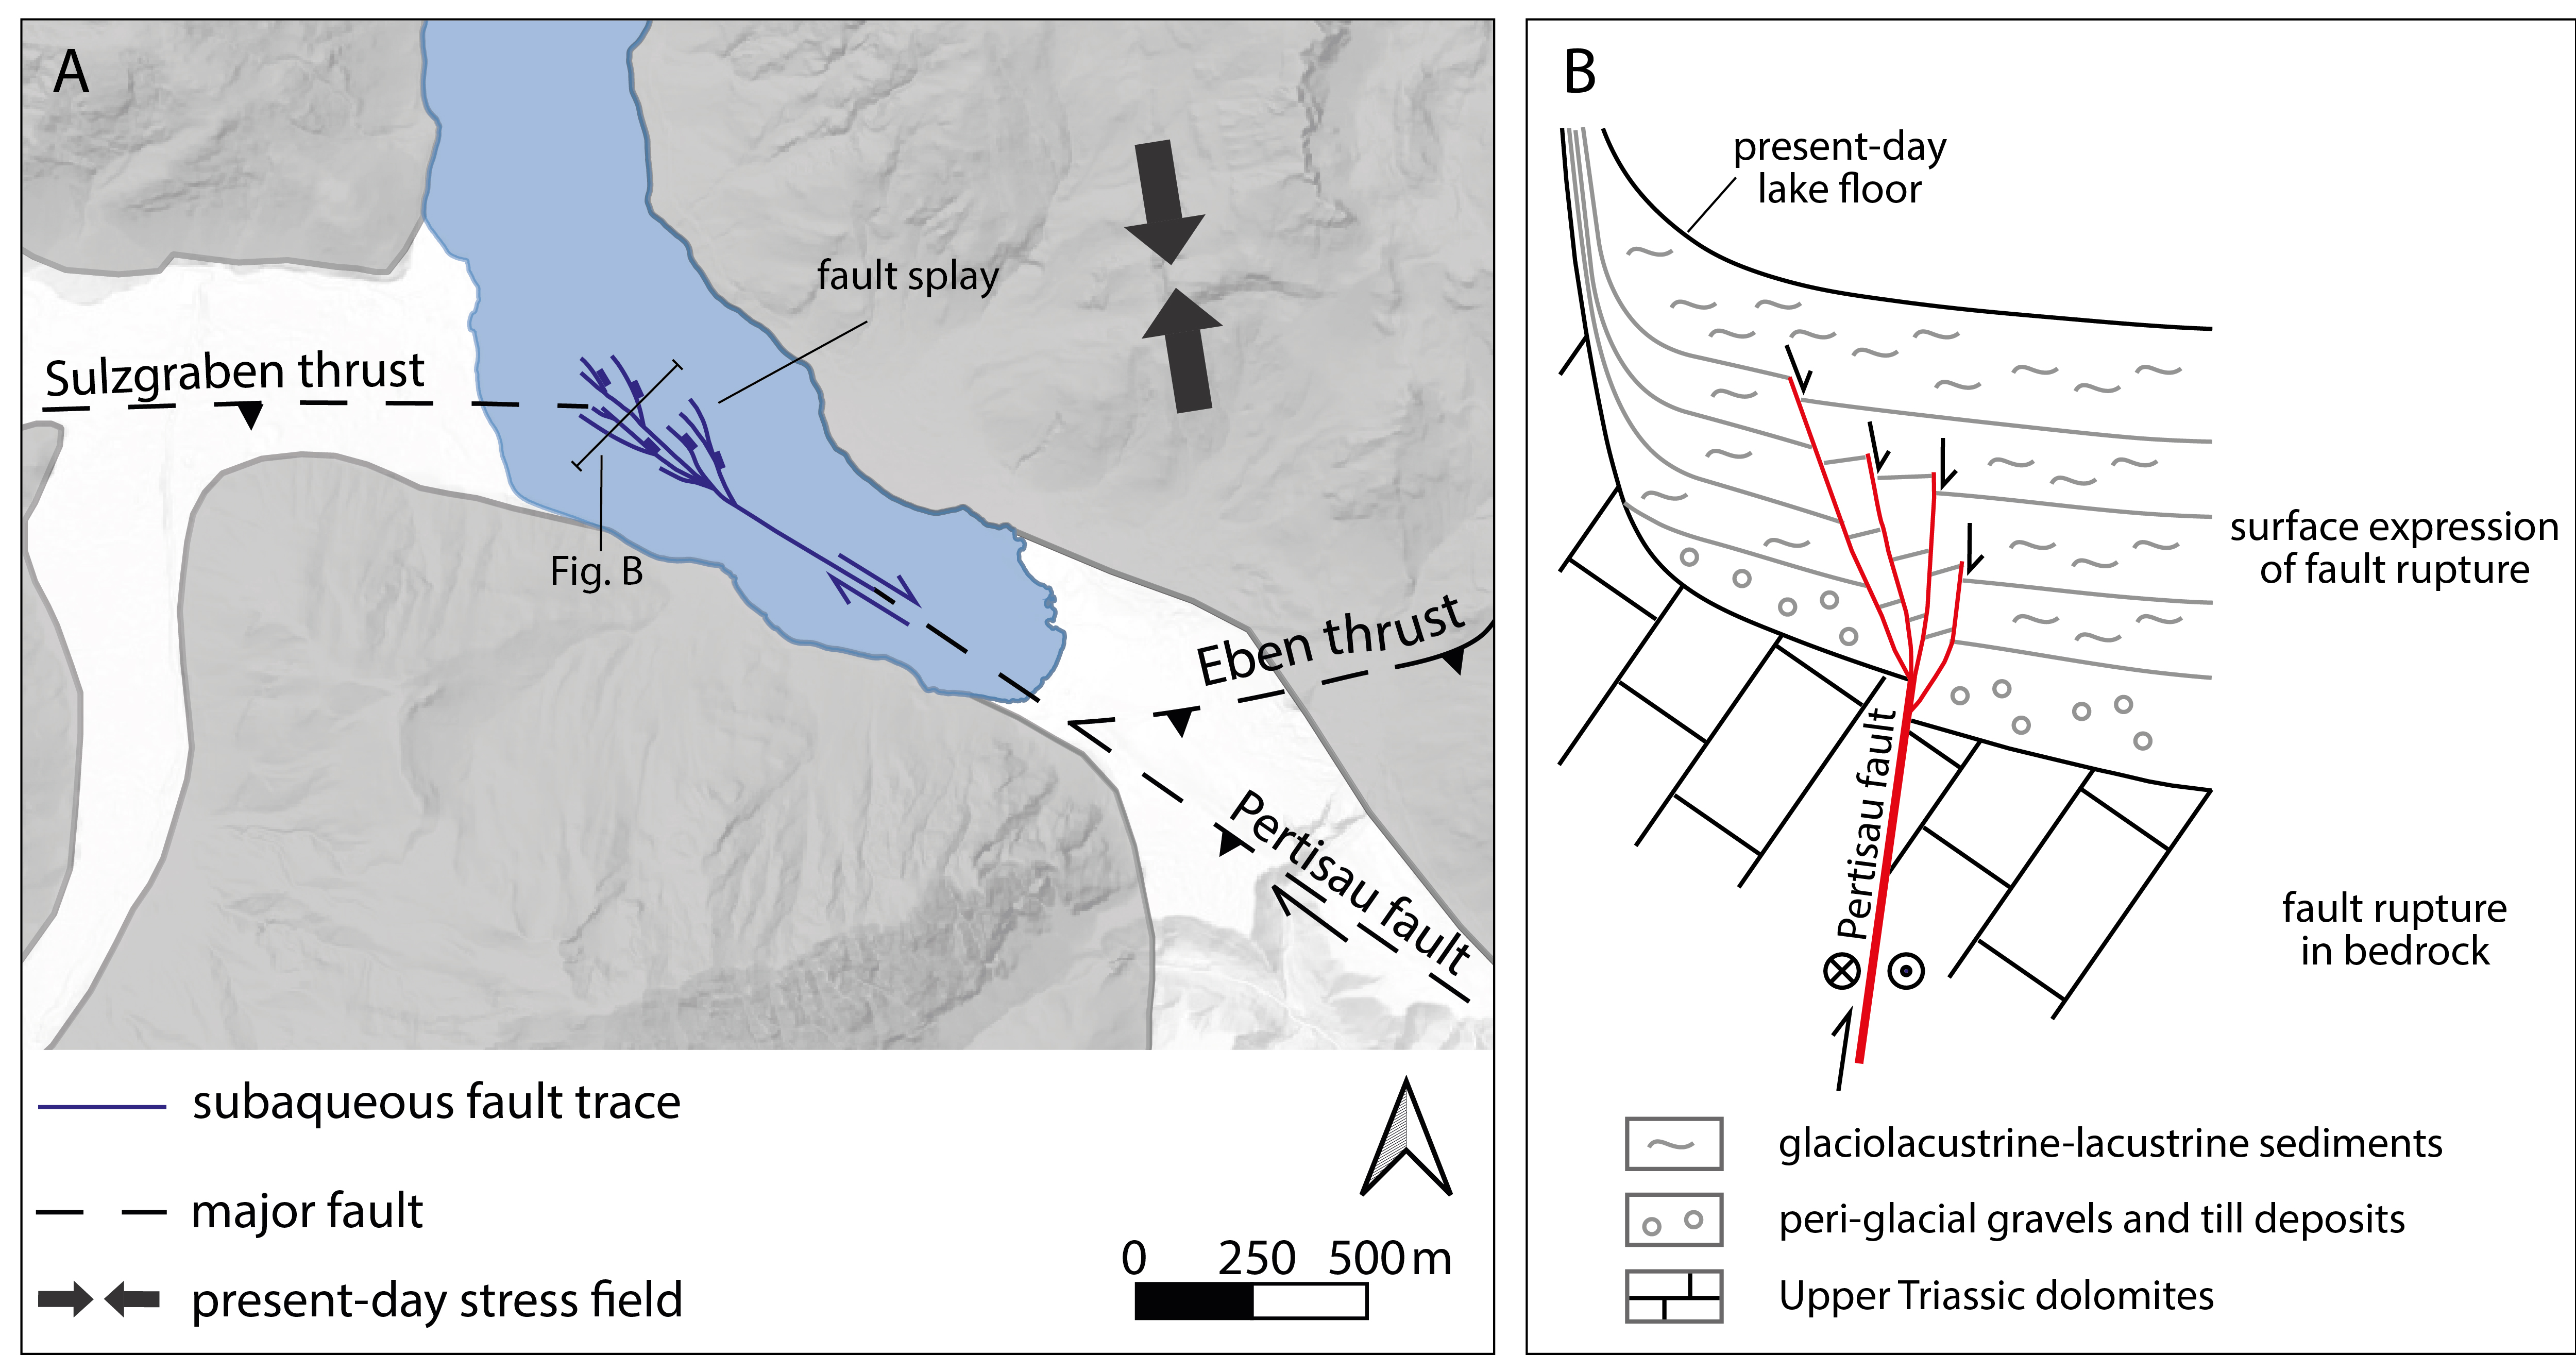 Combined On-Fault and Off-Fault Paleoseismic Evidence in the Postglacial Infill of the Inner-Alpine Lake Achensee (Austria, Eastern Alps)